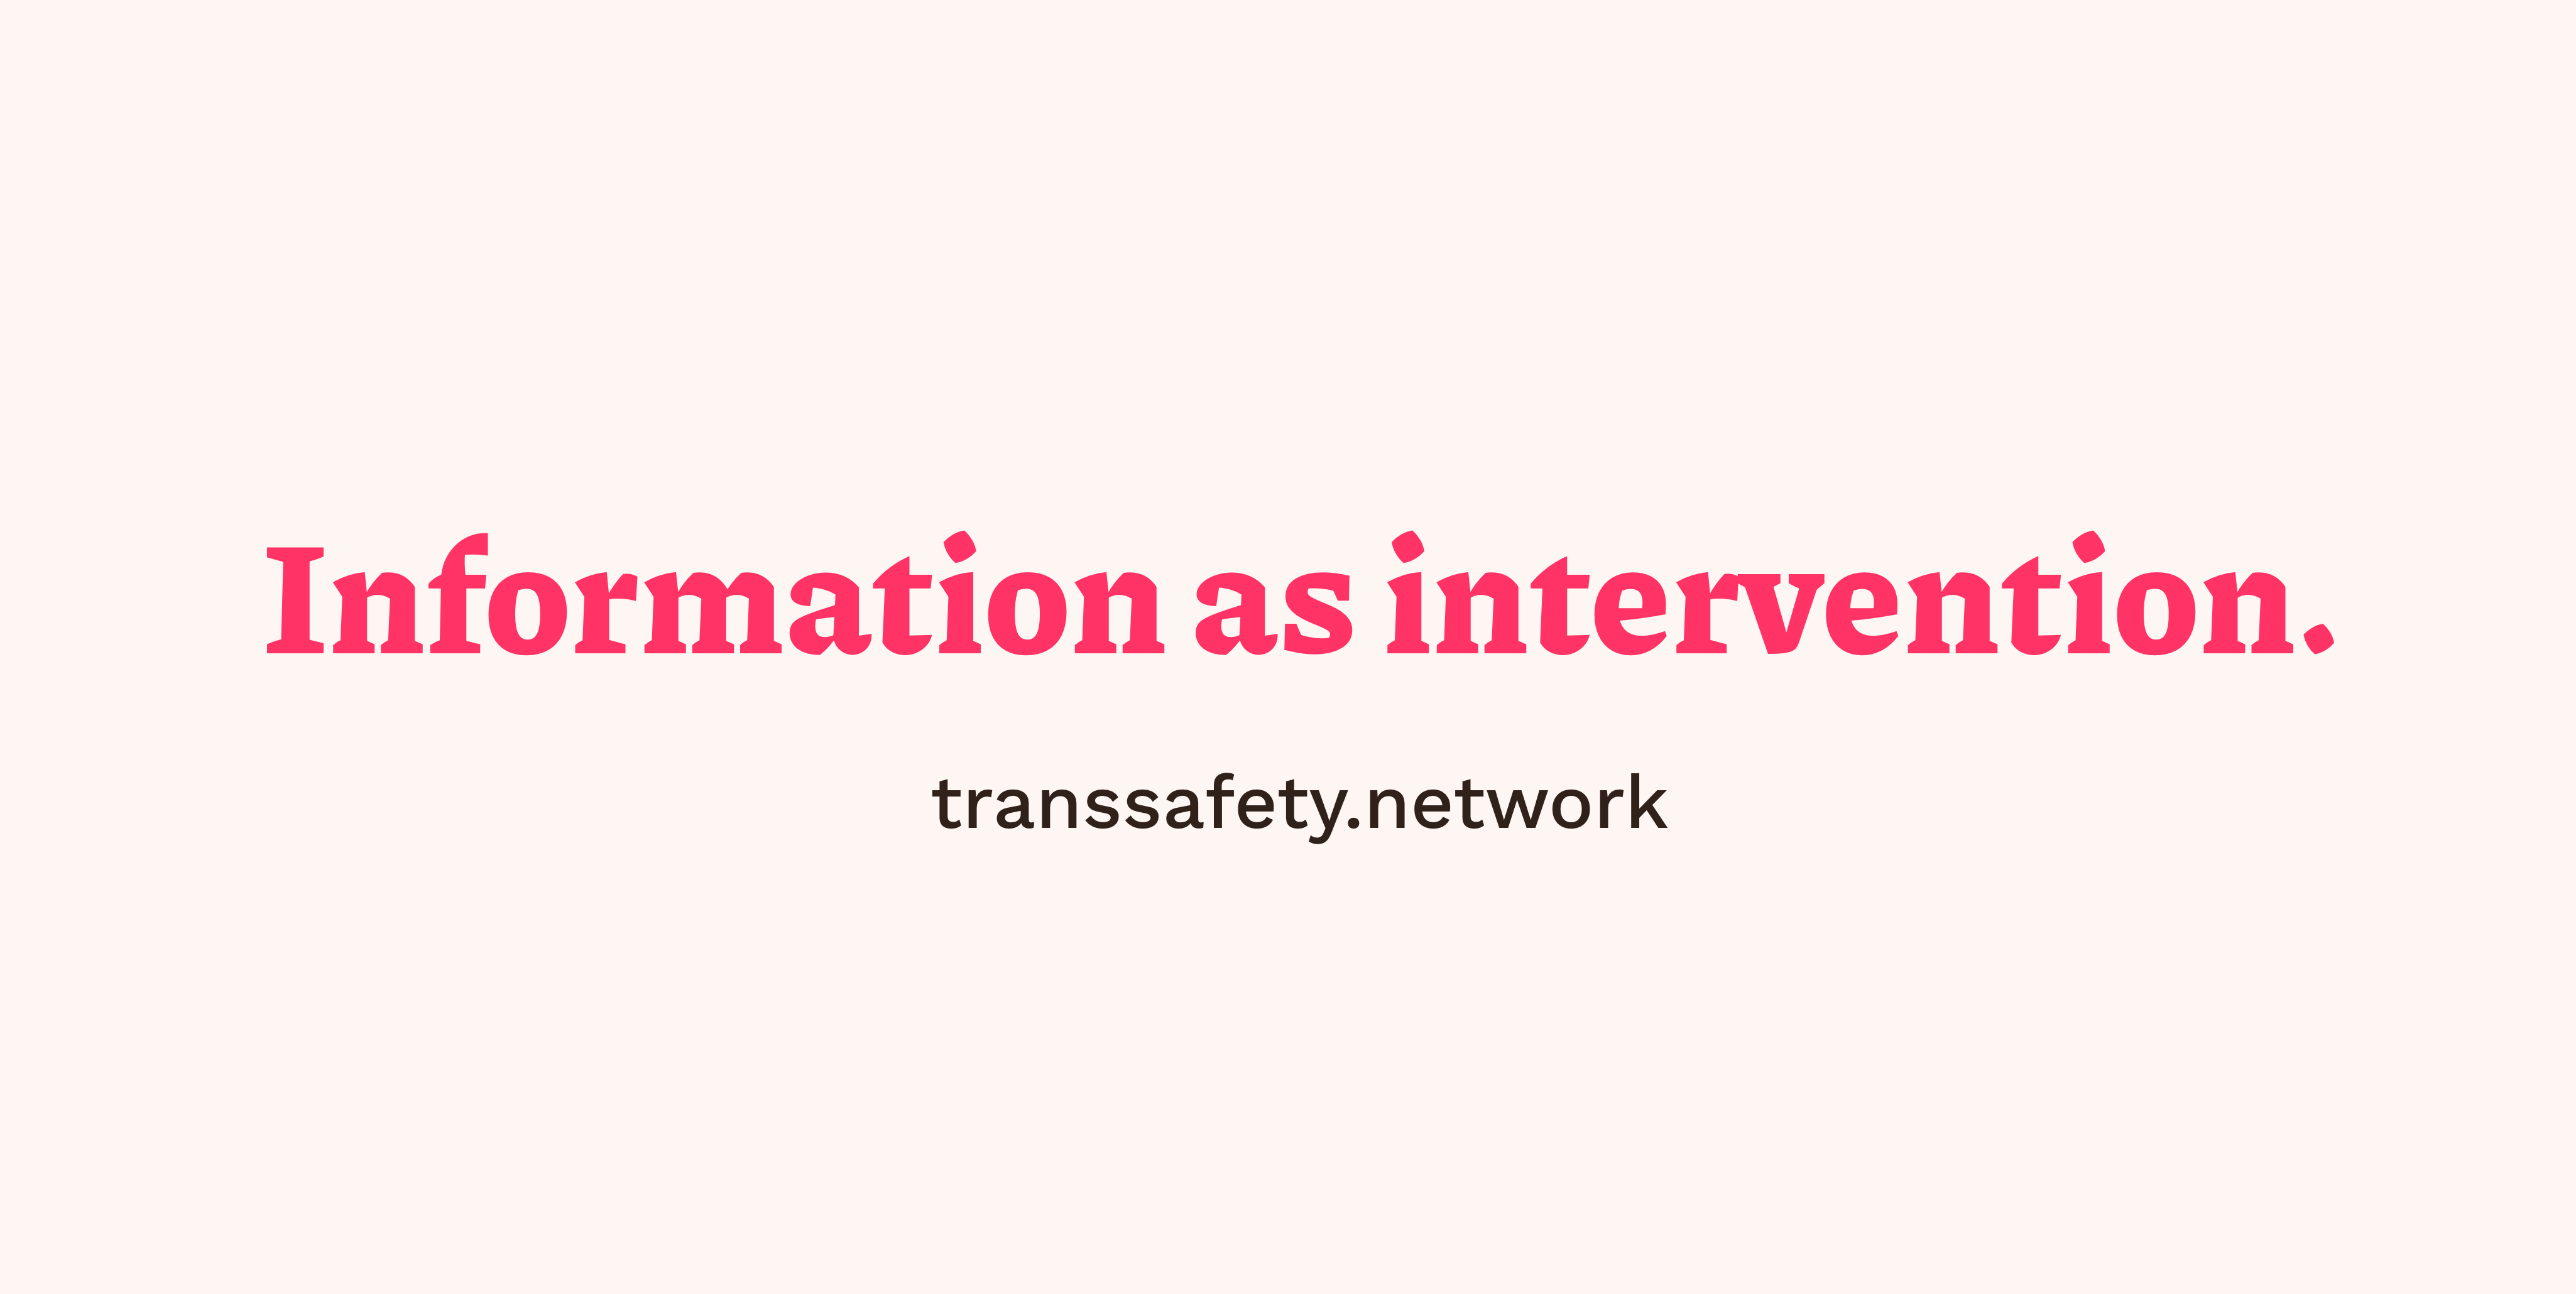 Pink text on a white background which reads 'Information as intervention.'. Below it is black text which reads 'transsafety.network'